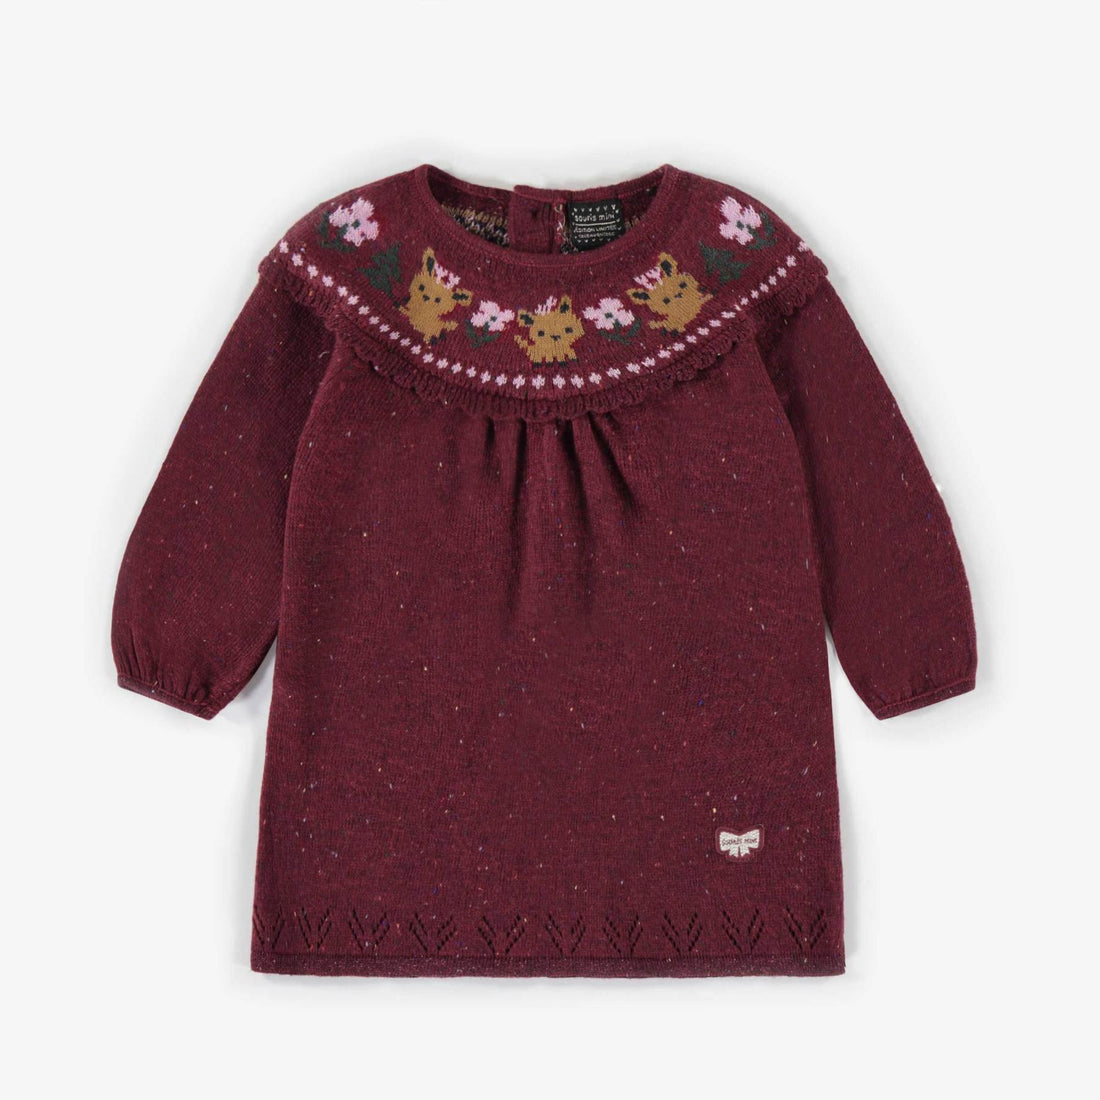 BURGUNDY KNITTED DRESS, BABY